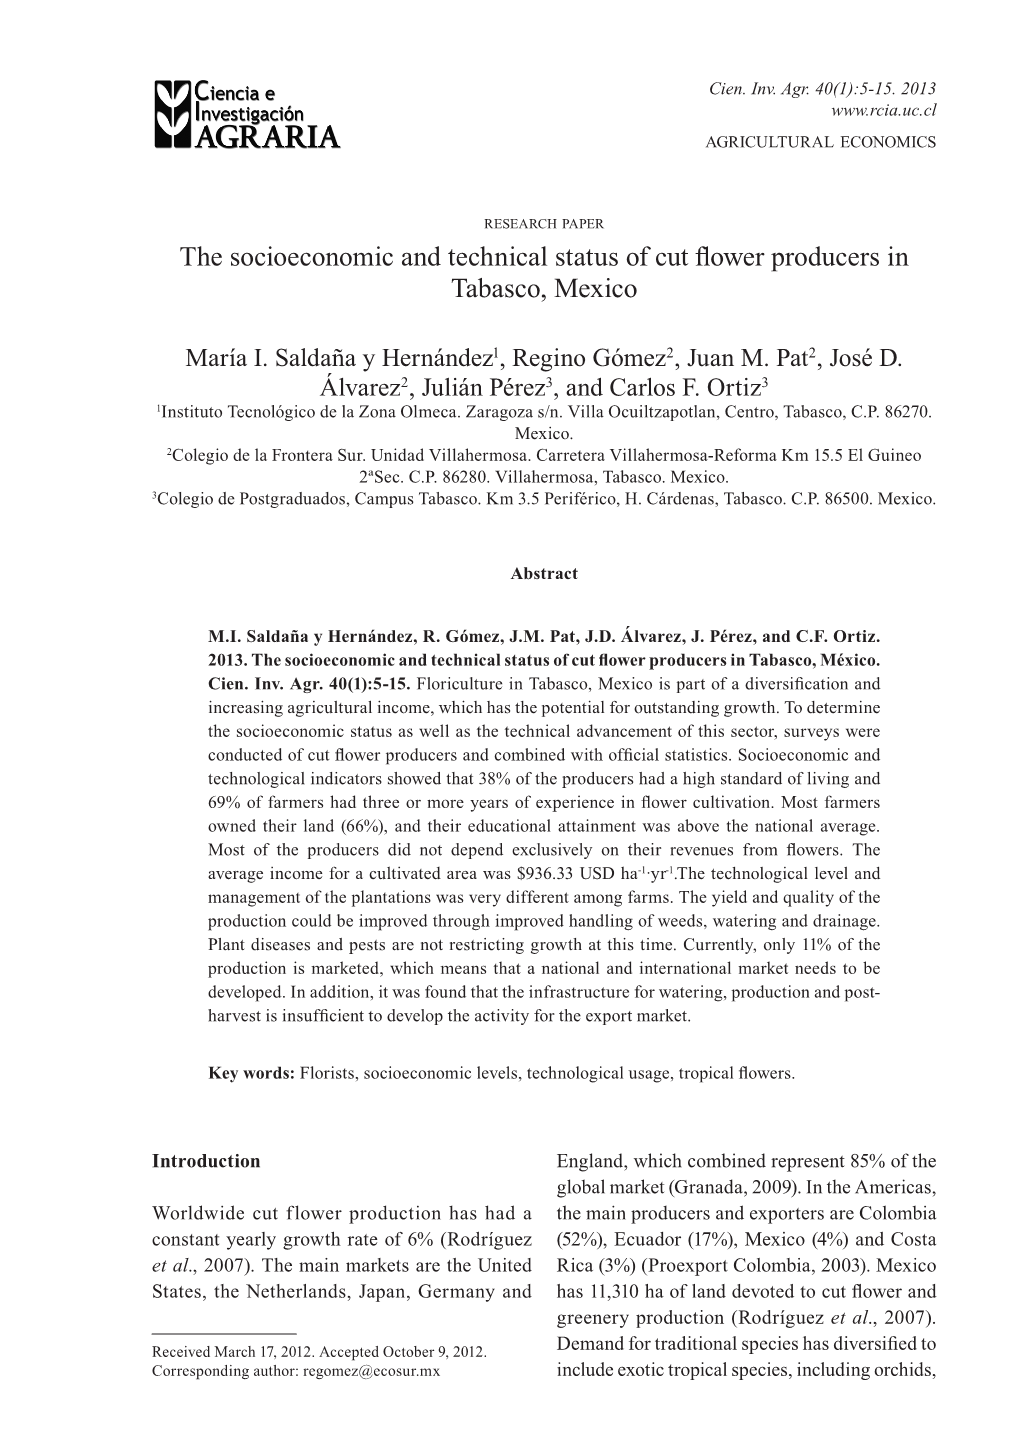 The Socioeconomic and Technical Status of Cut Flower Producers in Tabasco, Mexico